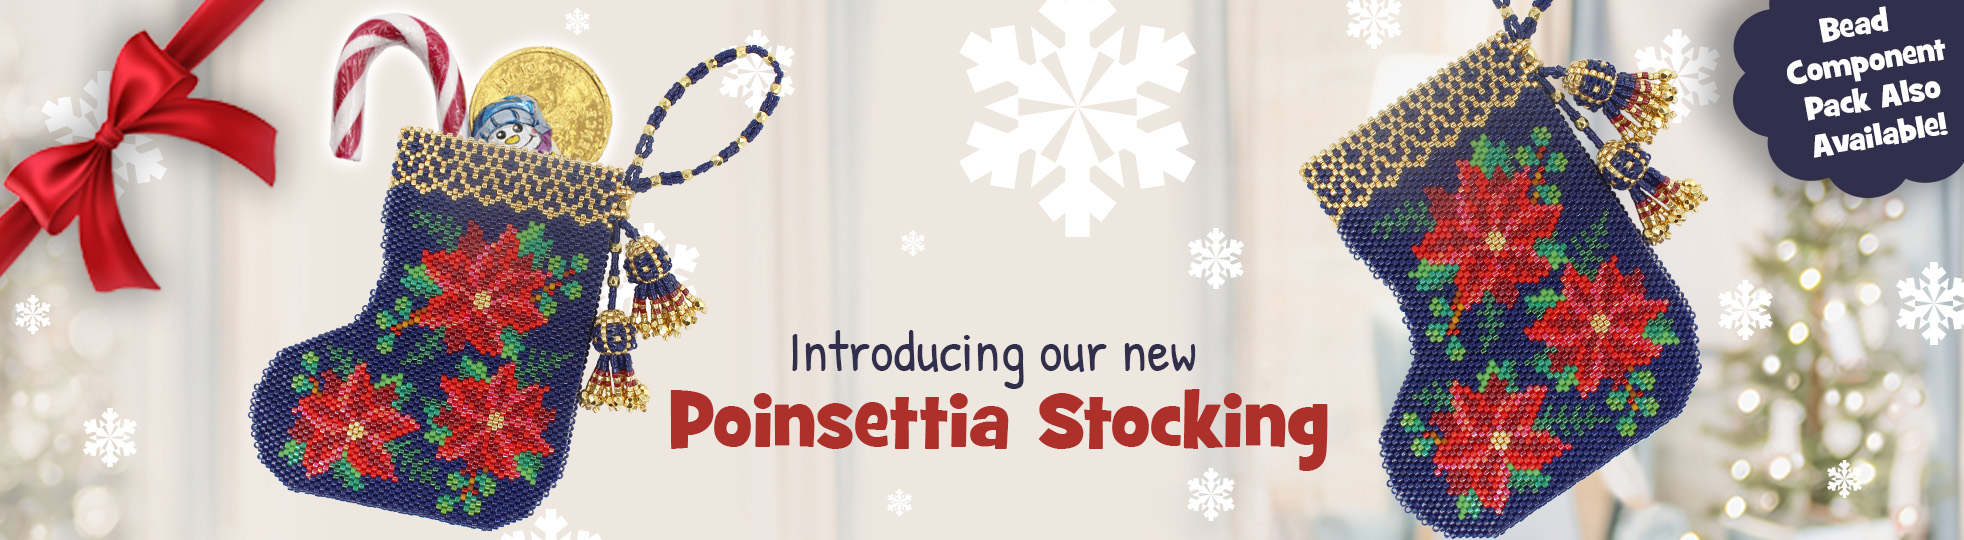 Christmas Poinsettia Stocking Component Pack